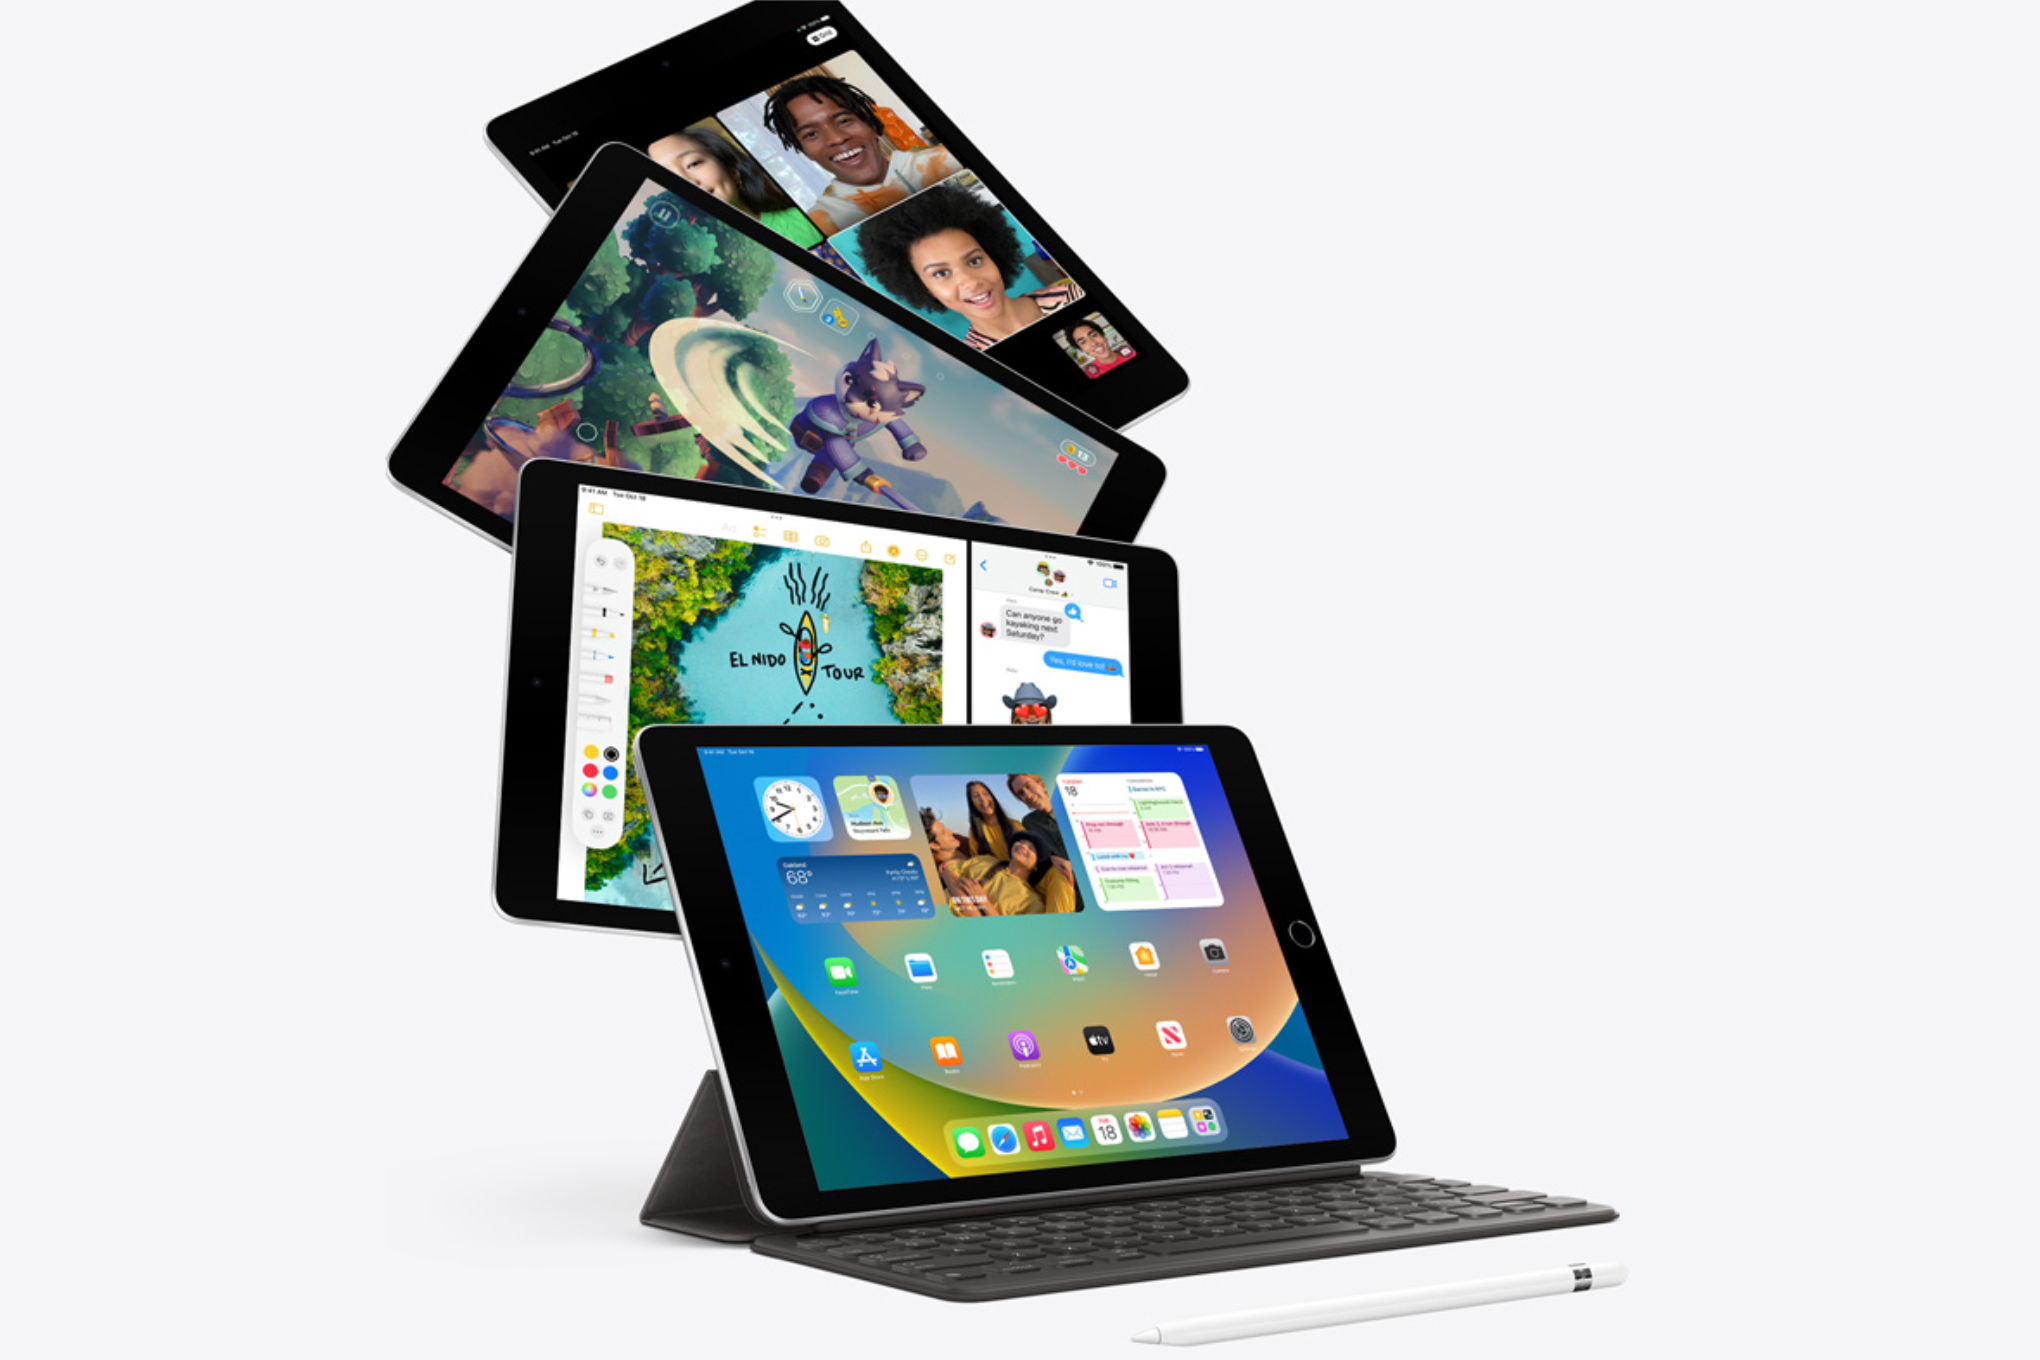 An image from Apple of its ninth generation iPad performing various tasks, including gaming, video chatting, and more.